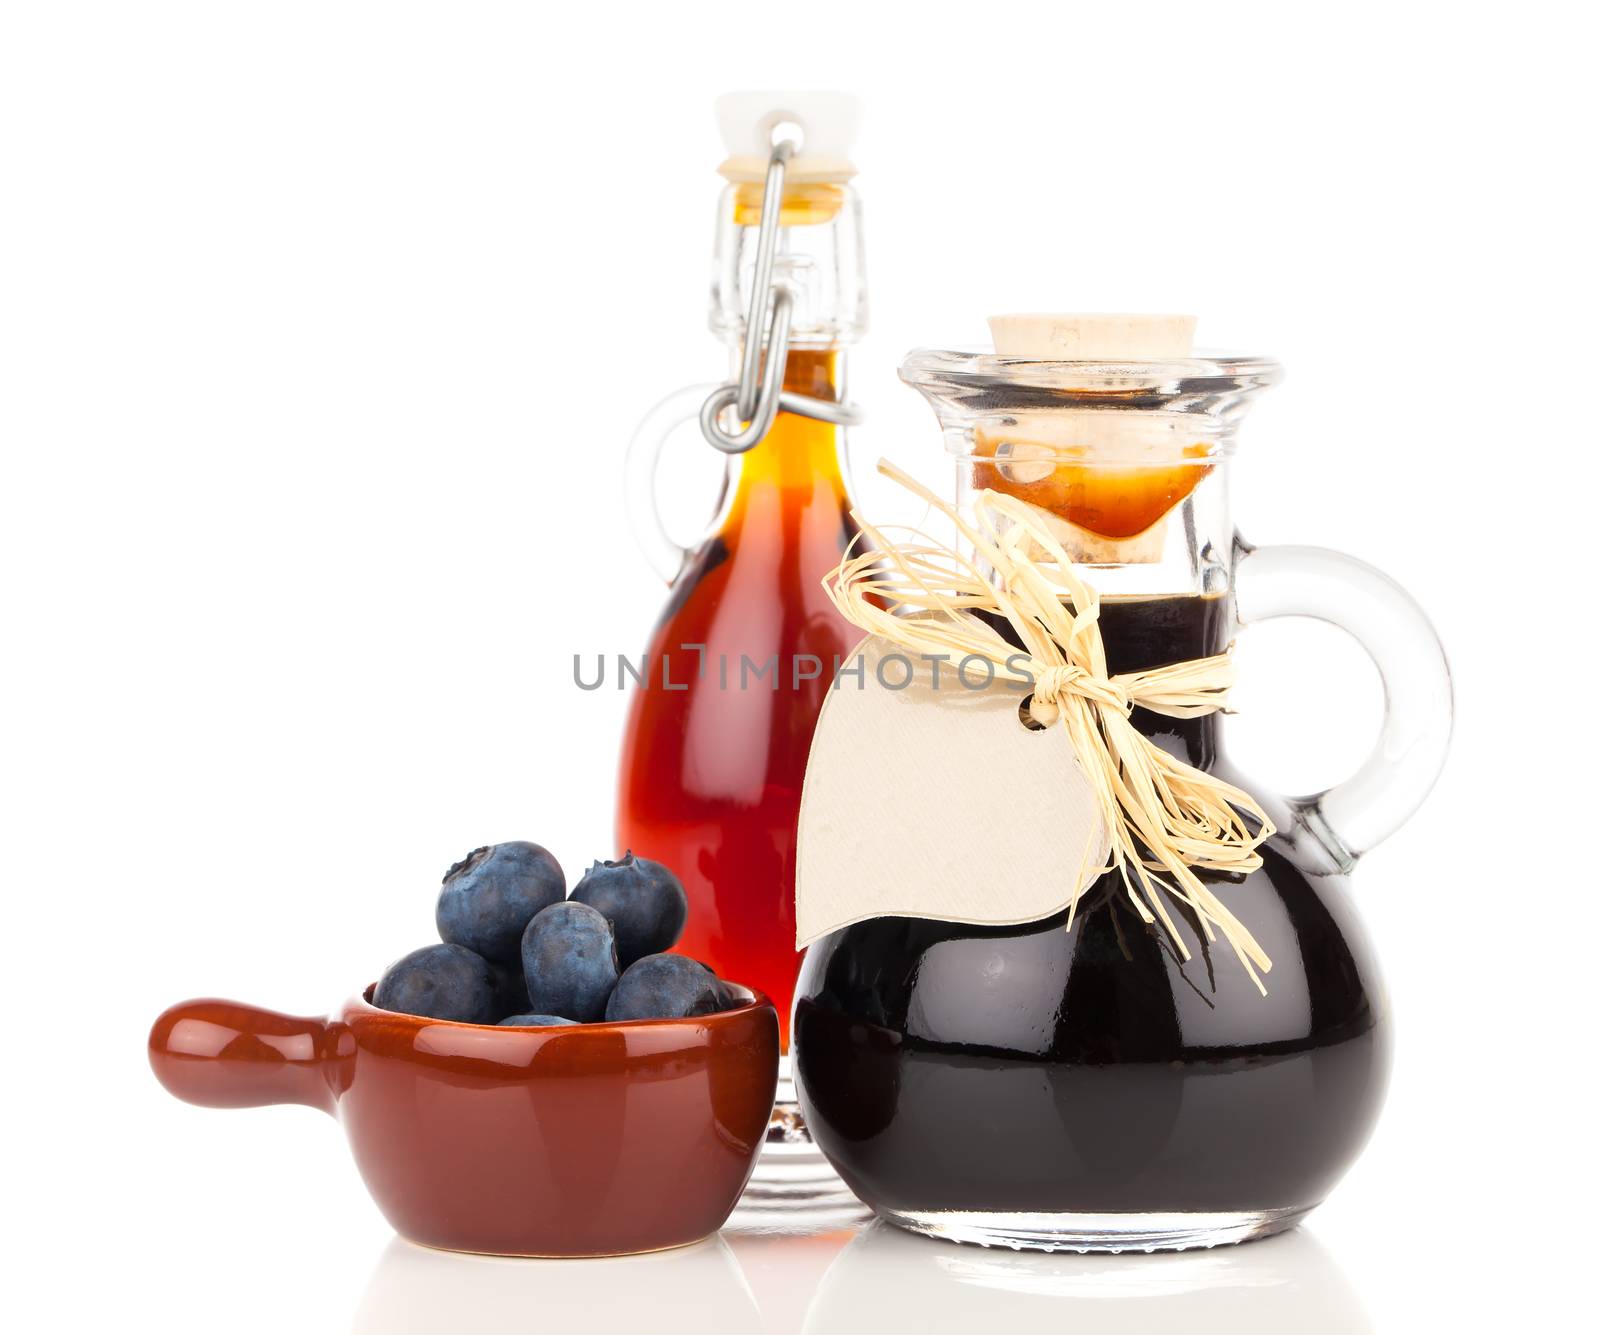 fresh blueberry and blueberry syrup in glass, bottle or mixture, by motorolka